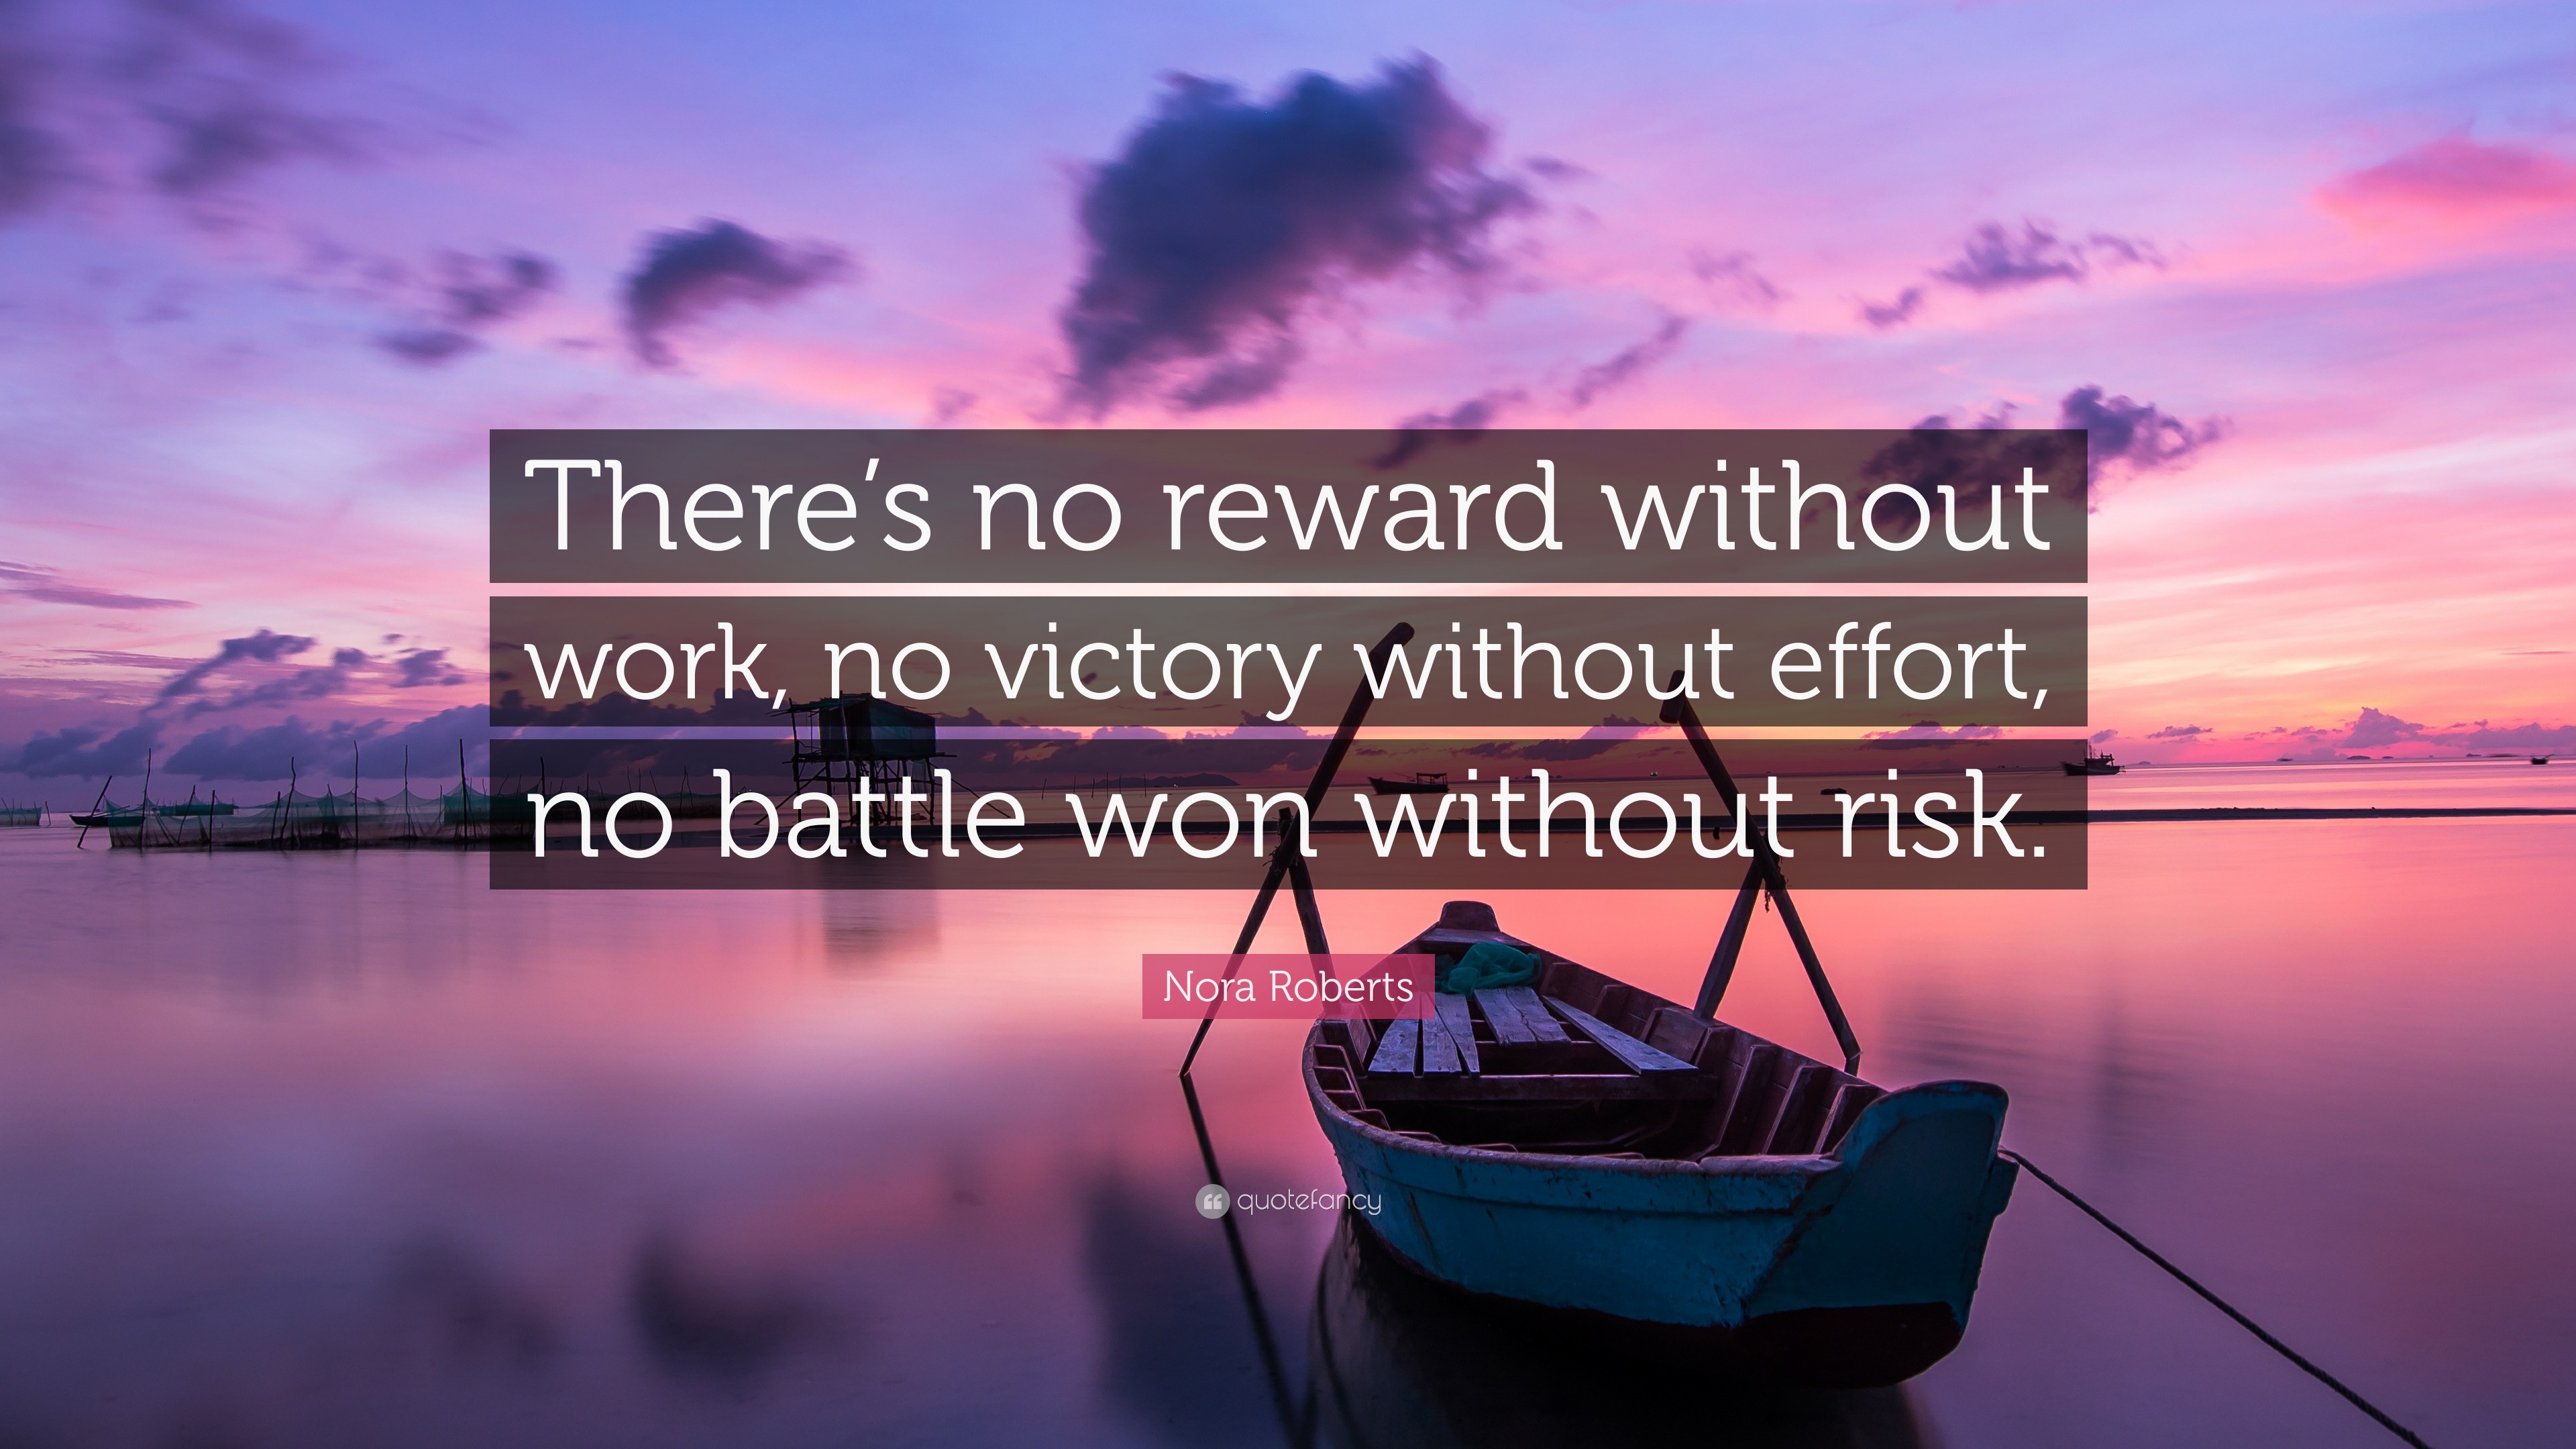 Nora Roberts Quote: "There's no reward without work, no ...